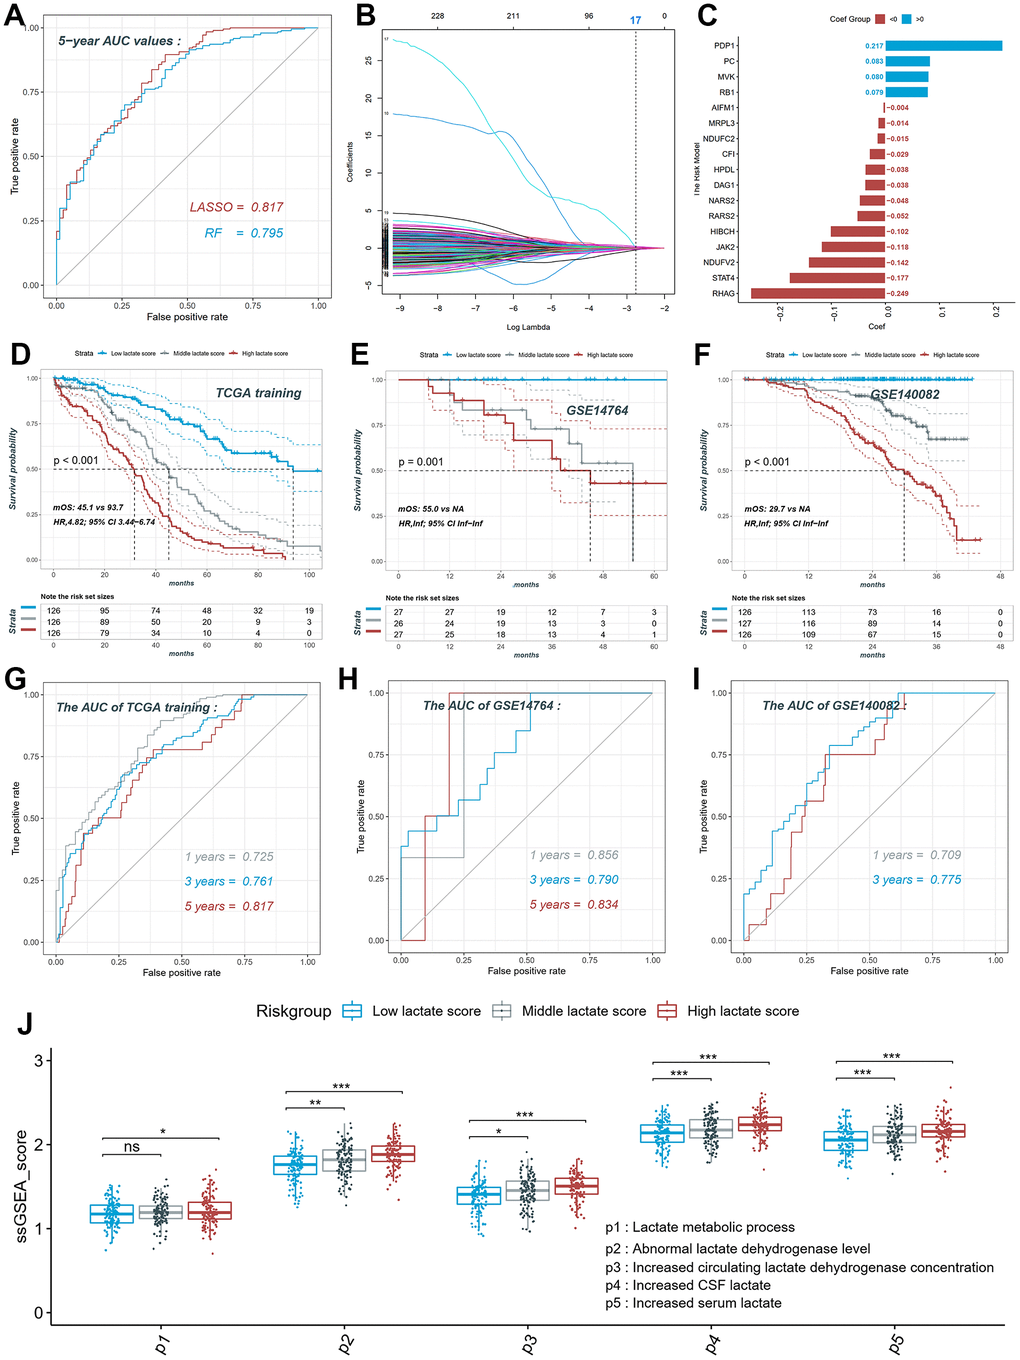 Construction and validation of the lactate score in ovarian cancer. (A) ROC curve of different models constructed by two algorithms LASSO and RF. (B) LASSO coefficient profiles of the 230 LRGs, which come from the pathways named lactate metabolic process, abnormal lactate dehydrogenase levels, increased CSF lactate, increased serum lactate, increased circulating lactate dehydrogenase concentration. (C) The risk model consists of 17 genes and their coefficient. (D) The KM plot of high, middle and low lactate score patients in training set. (E) The KM plot of high, middle and low lactate score patients in GSE14764 dataset. (F) The KM plot of high, middle and low lactate score patients in GSE140082 dataset. (G) ROC curve of the risk model in training set. (H) ROC curve of the risk model in GSE14764 dataset; (I) ROC curve of the risk model in GSE140082 dataset. ROC: receiver operating characteristic; LASSO: least absolute shrinkage and selection operator; RF: random forest. LRGs: lactate-related genes.